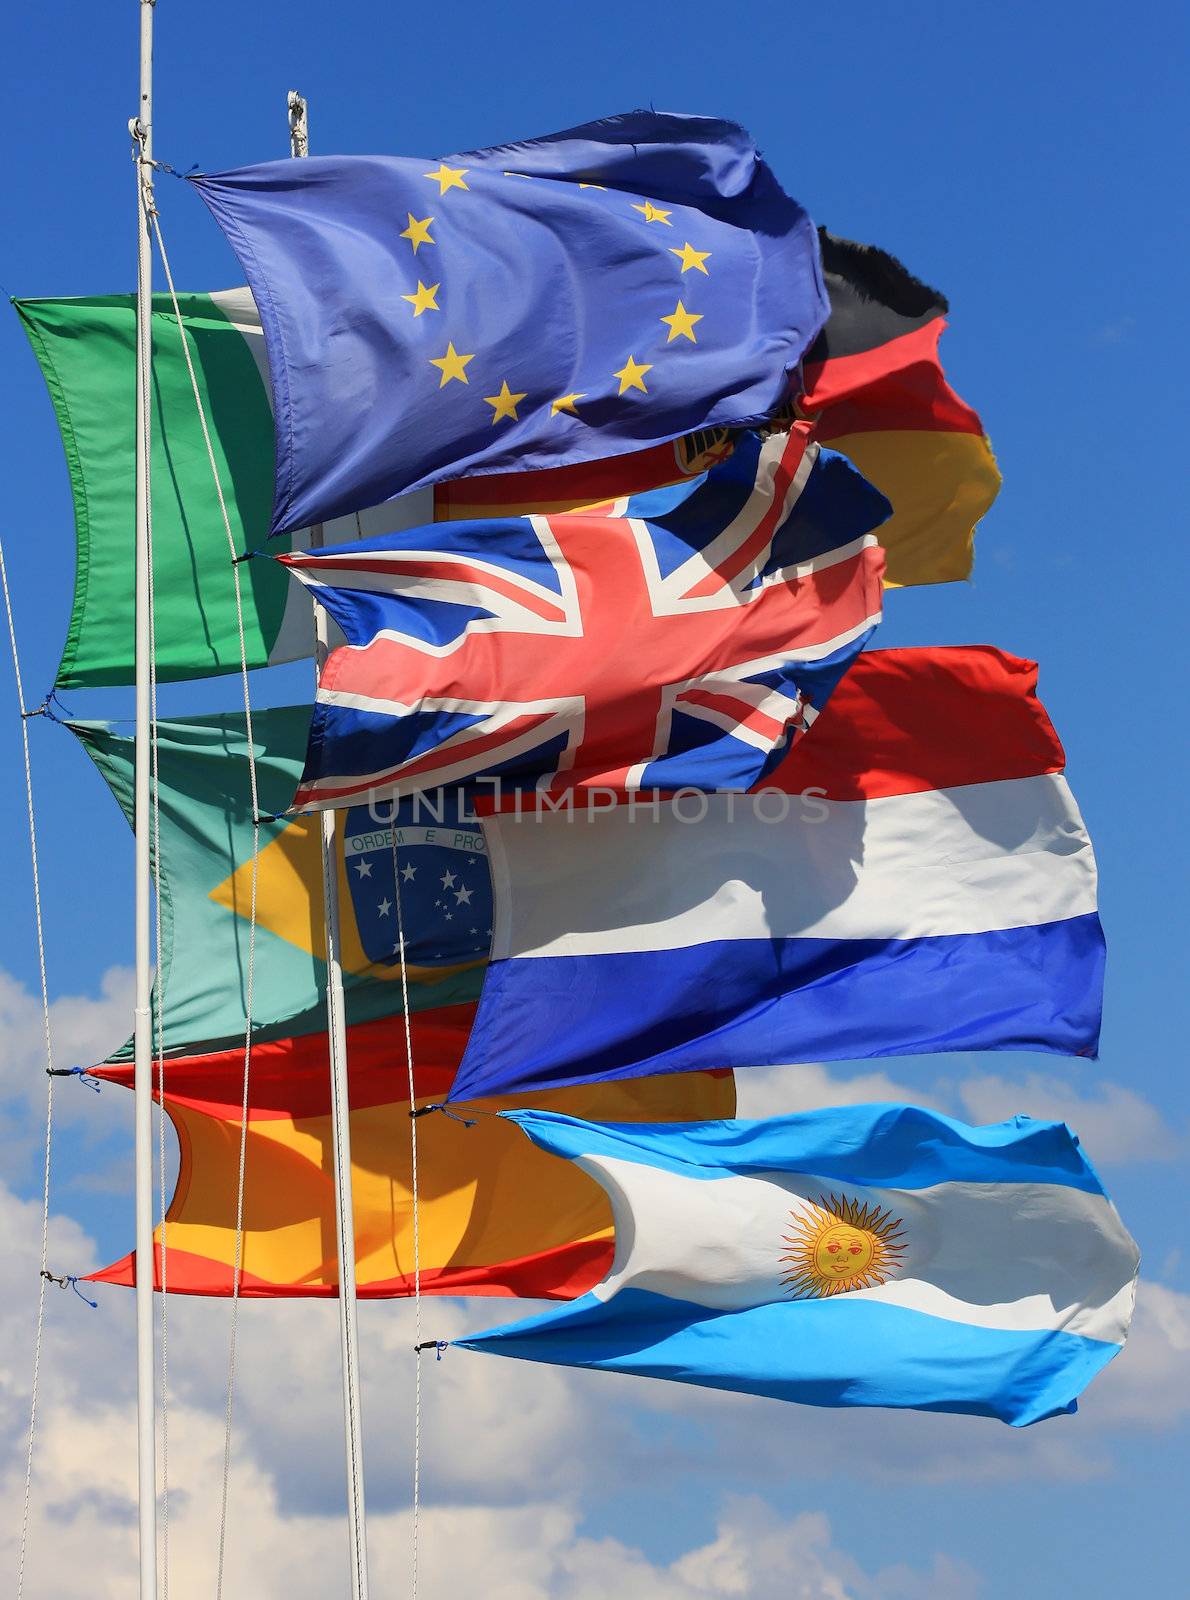 The national flags of France, UK, italy, Spain and Germany along with the European Union flag as well as the Brazilian and Argentinian all flying together.